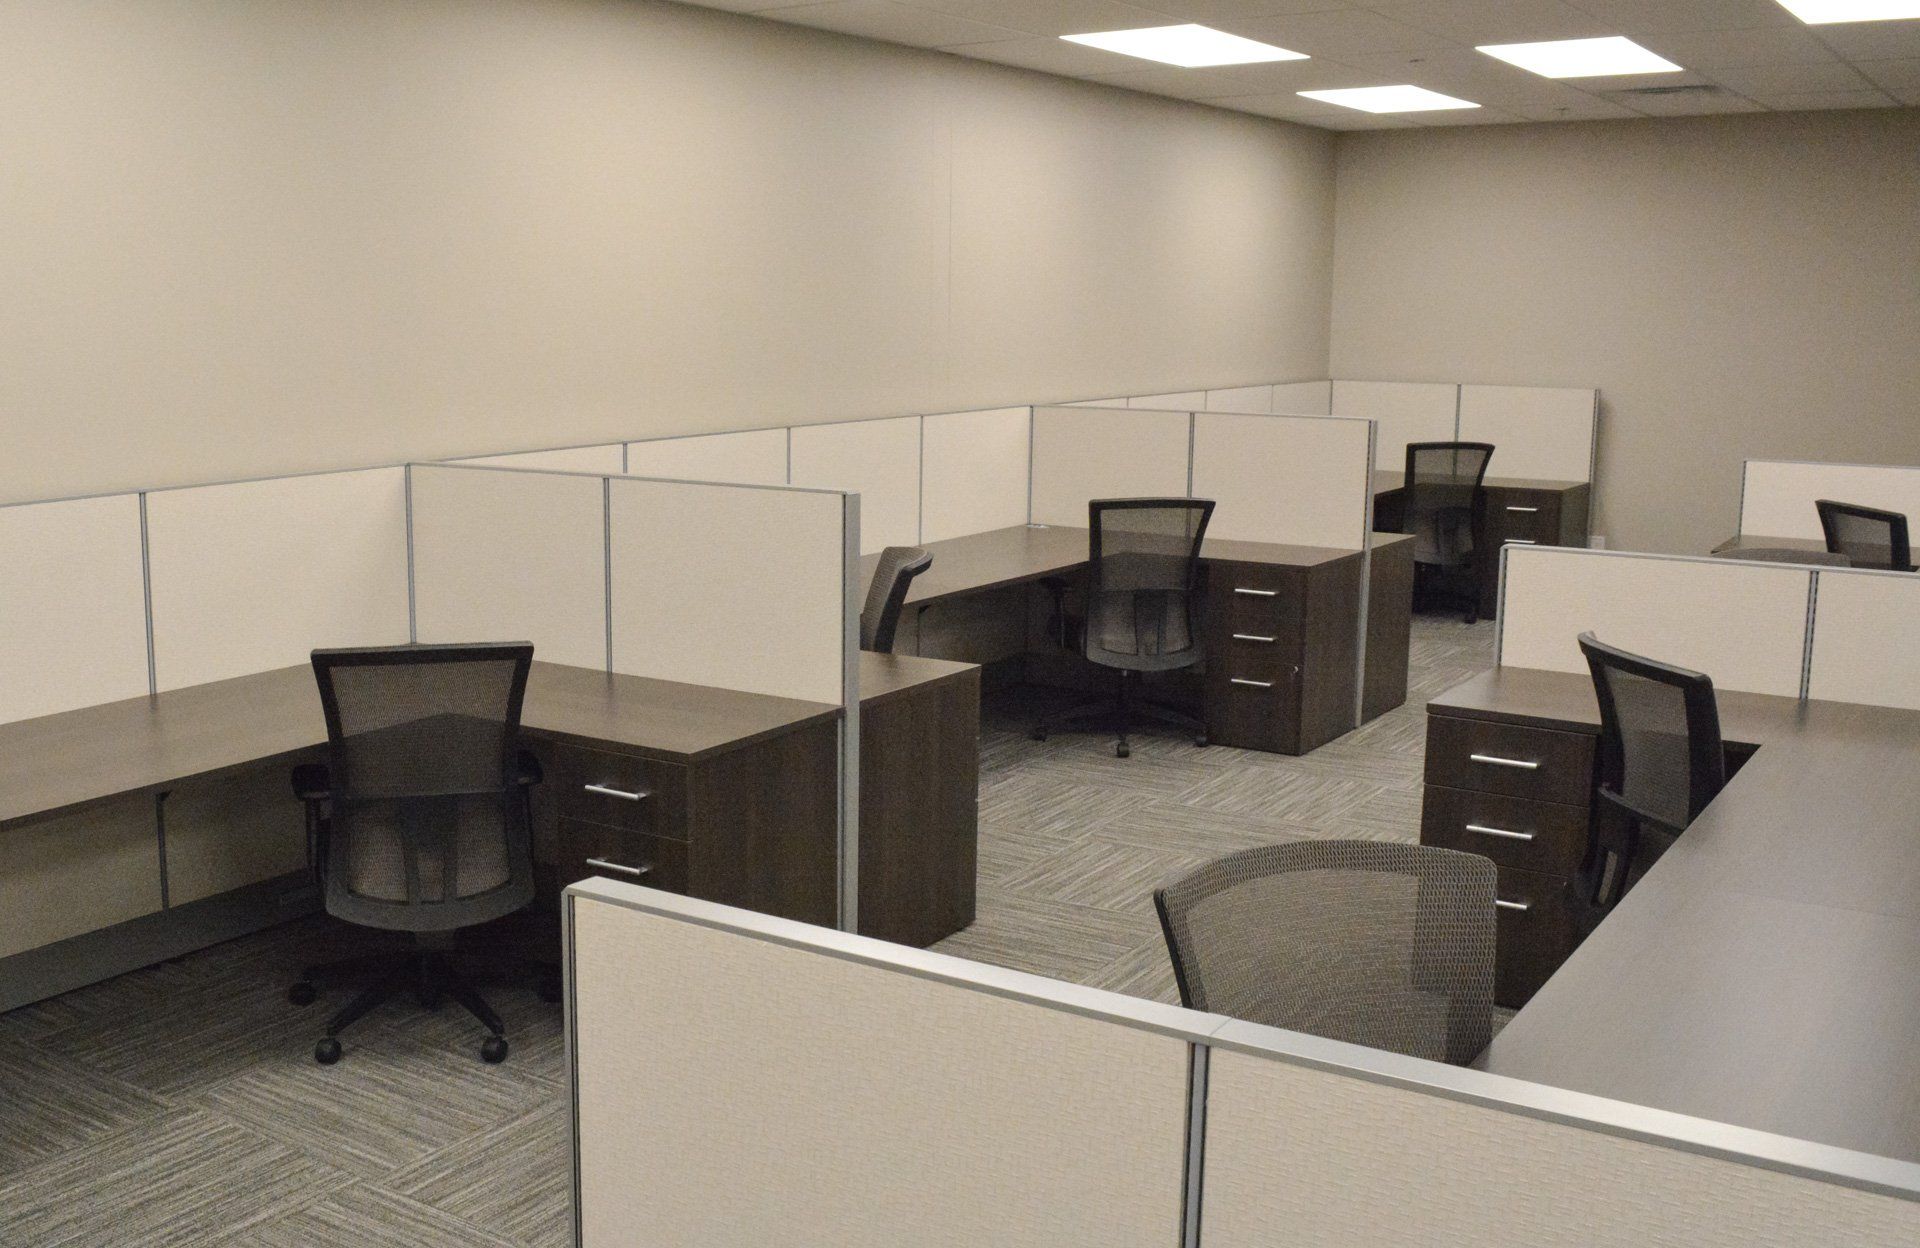 cubicles in an office with black chairs and desks